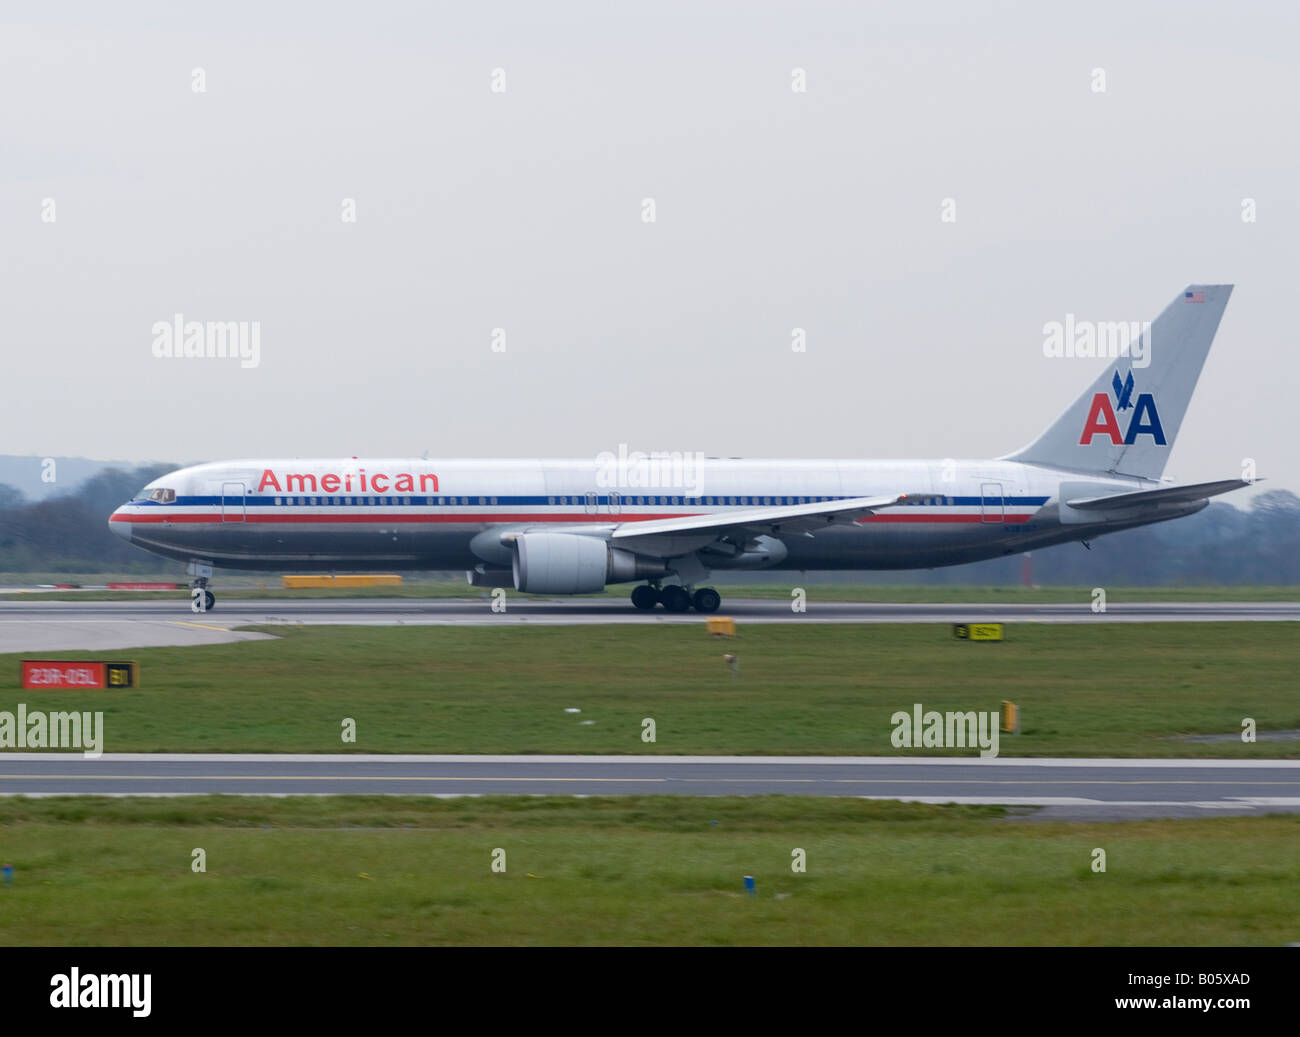 American Airlines Boeing 767-300 Accelerating on Runway for Take-off at Manchester Ringway Airport Greater Manchester England UK Stock Photo